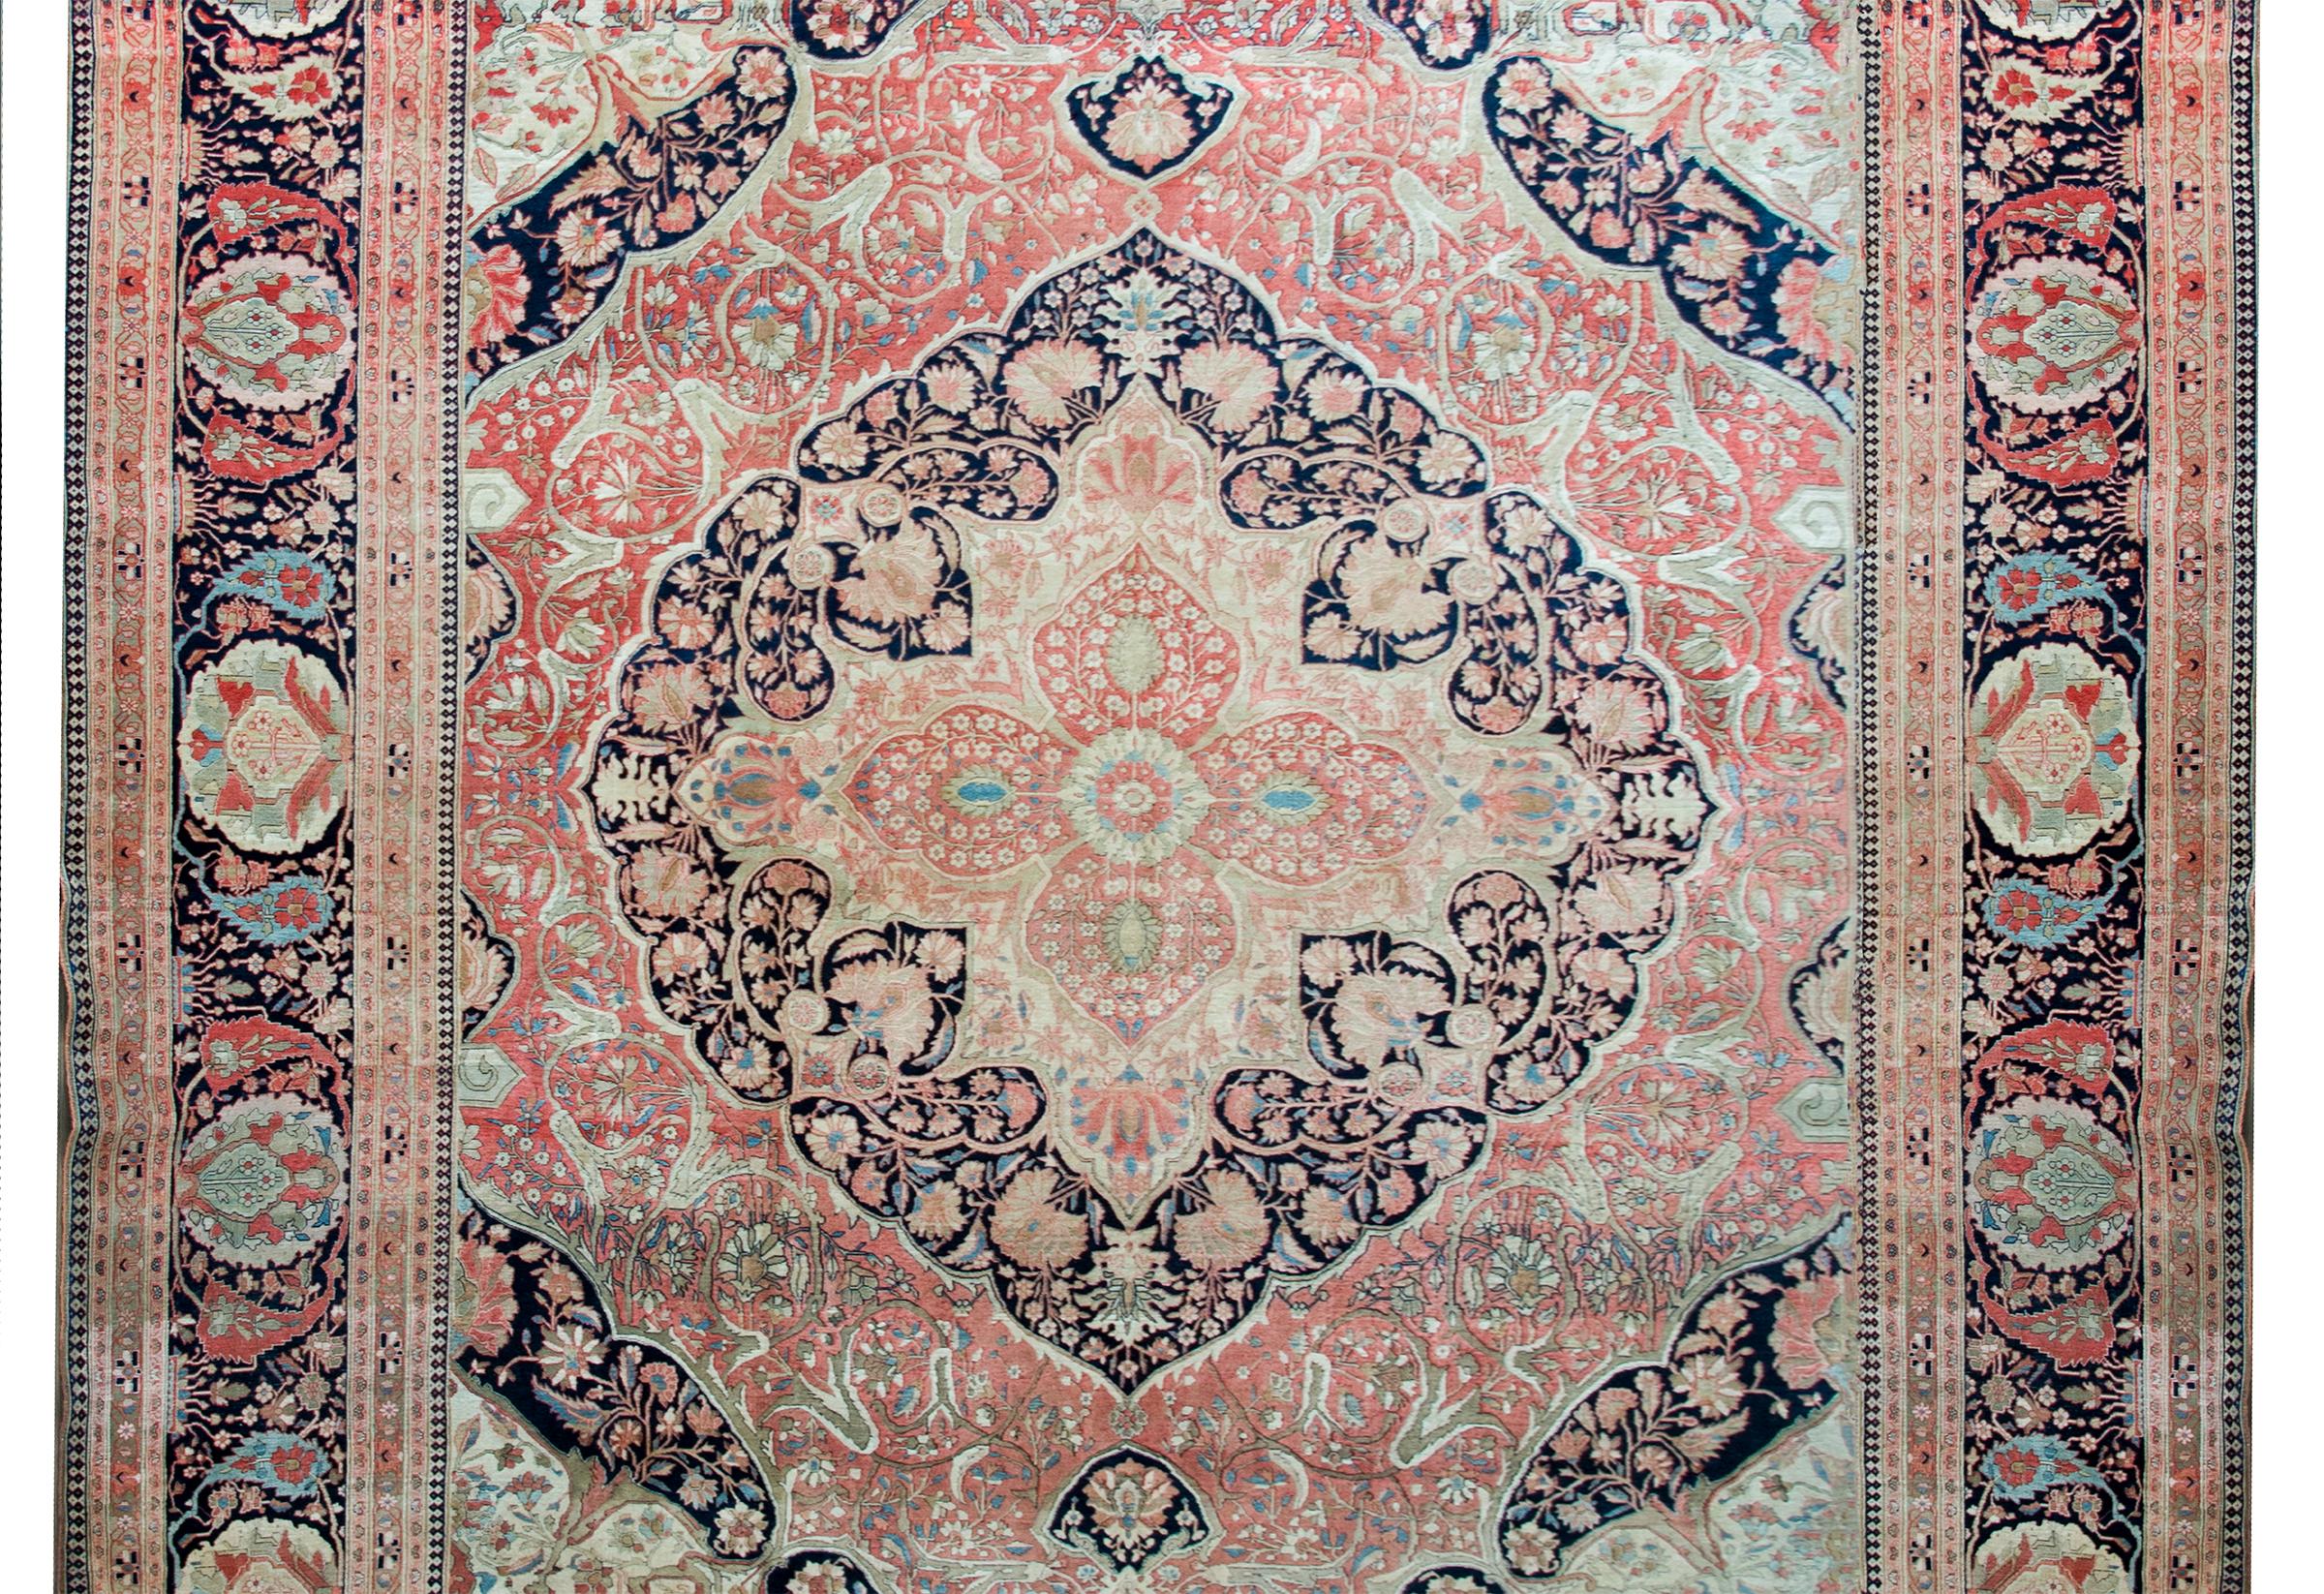 A stunning and rare late 19th century Persian Mohtasham Kashan rug with the most mesmerizing intently woven floral patterned medallion living amidst an equally incredible field of more flowers and scrolling vines, surrounded by an amazing border